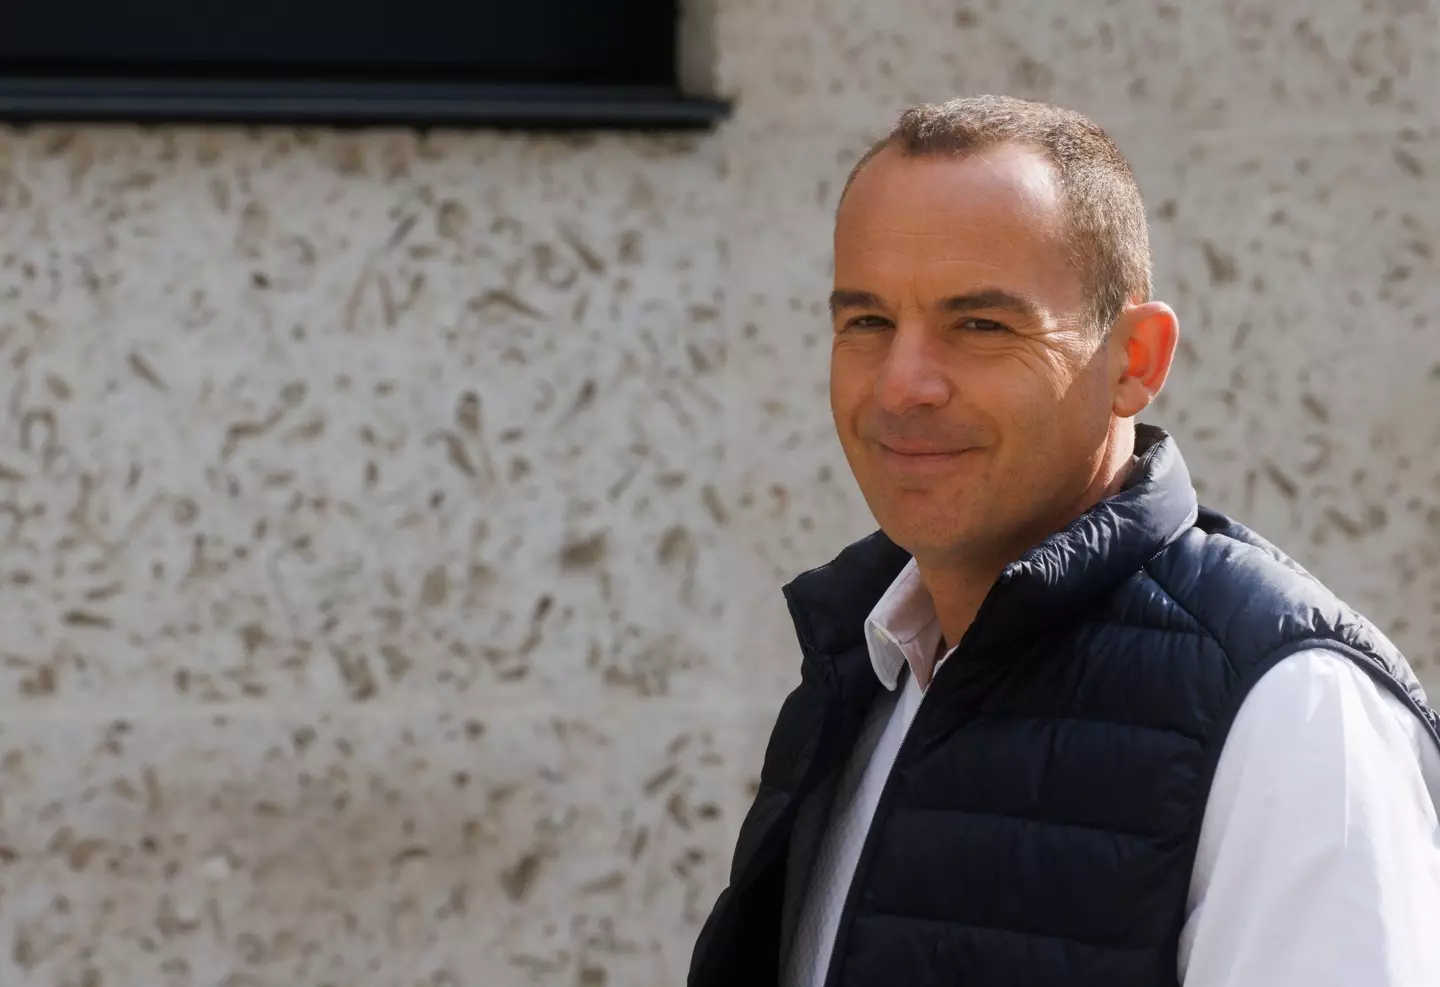 Martin Lewis has revealed a £79 hack customers can use before their Amazon Prime subscription increases.